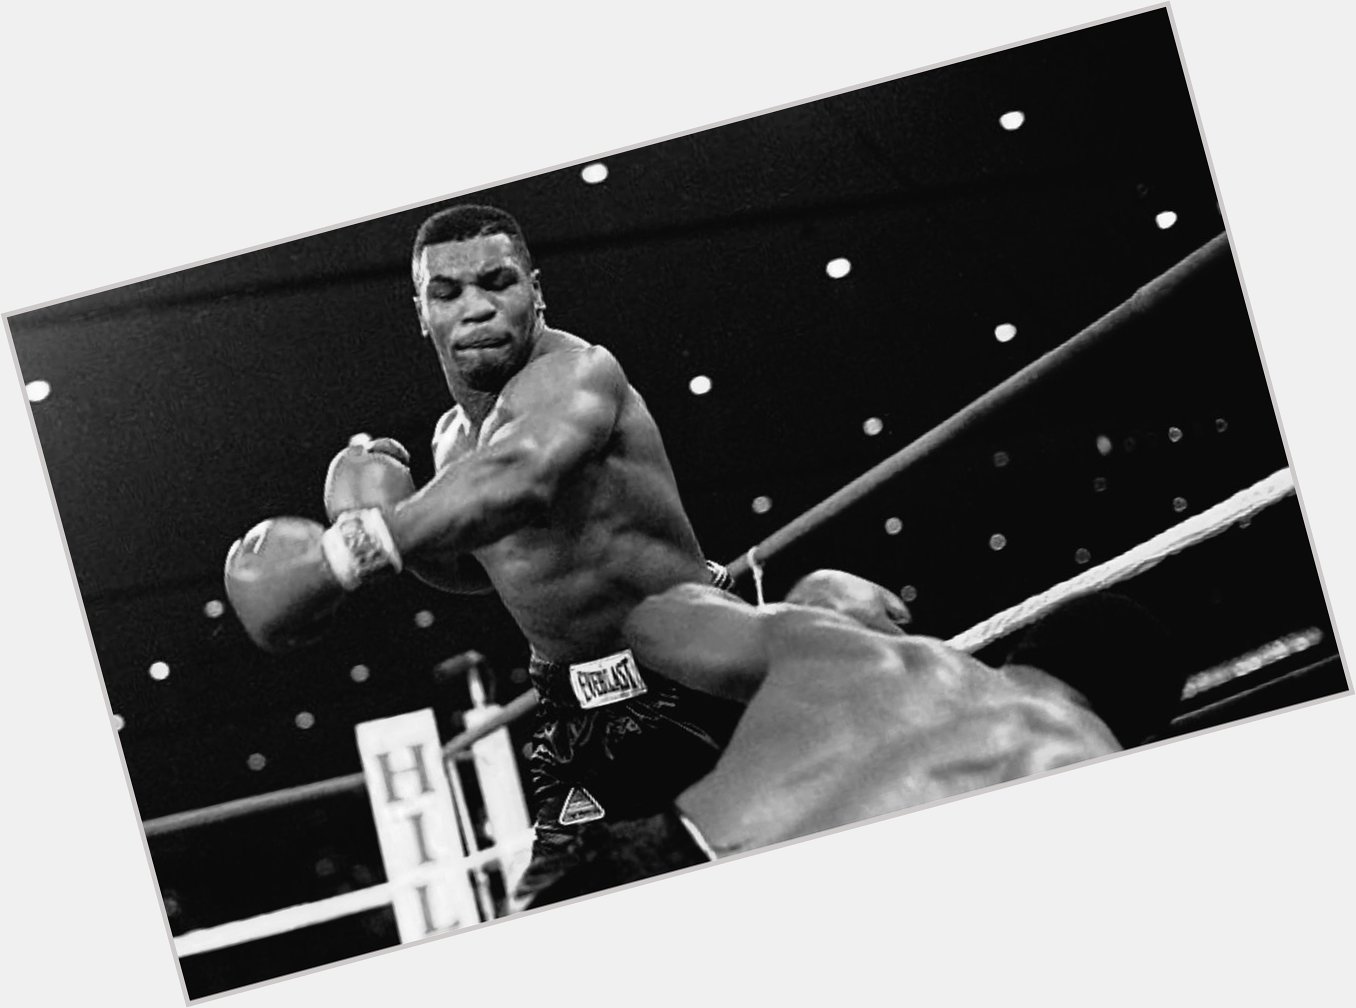 Happy birthday to perhaps the most feared fighter in combat sports history.

Happy 51st birthday to Iron Mike Tyson. 